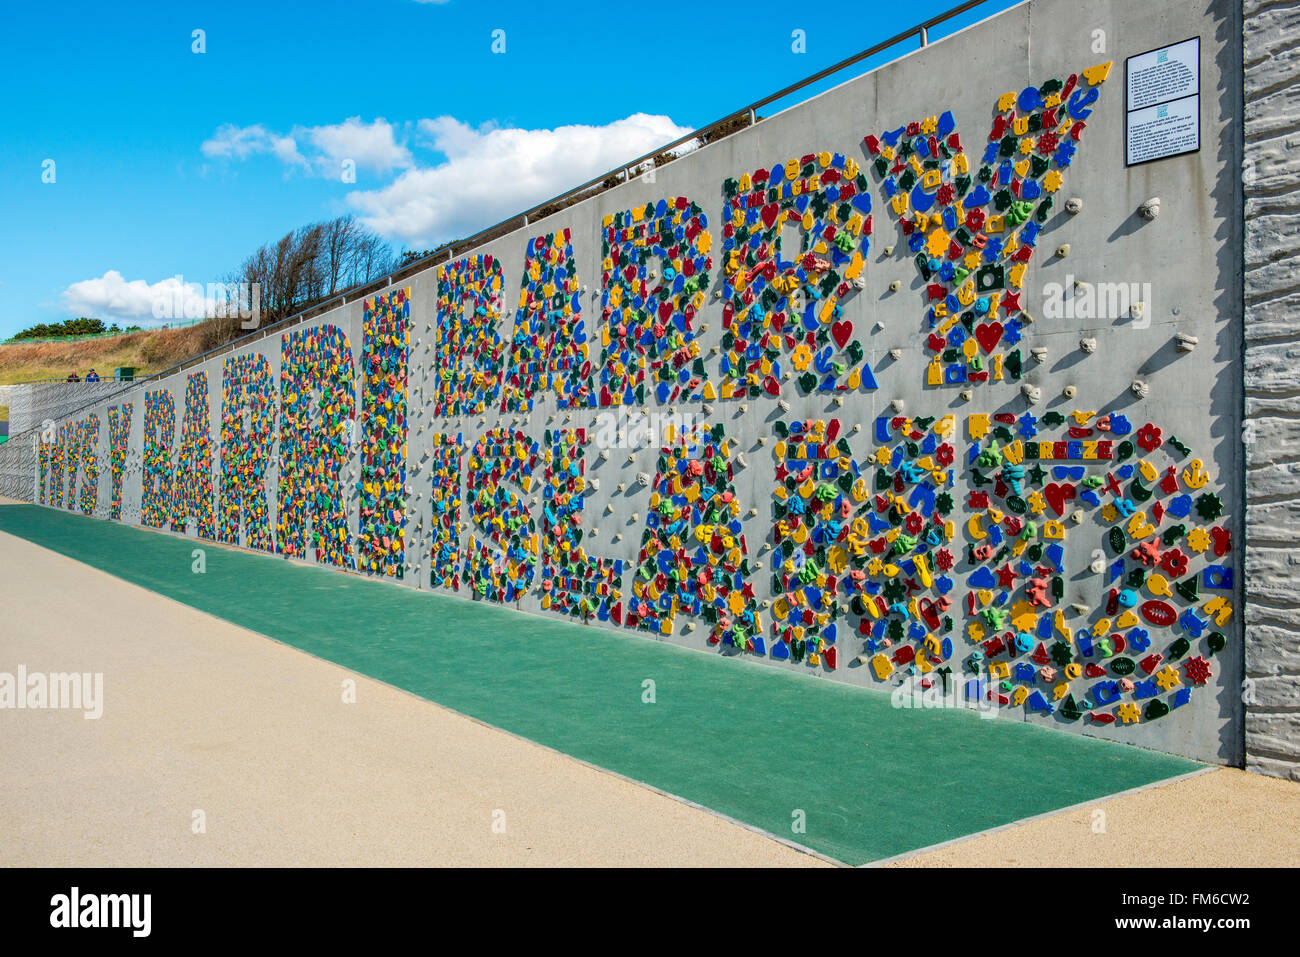 Children's Climbing Wall at Whitmore Bay, Barry Island, south Wales Stock Photo